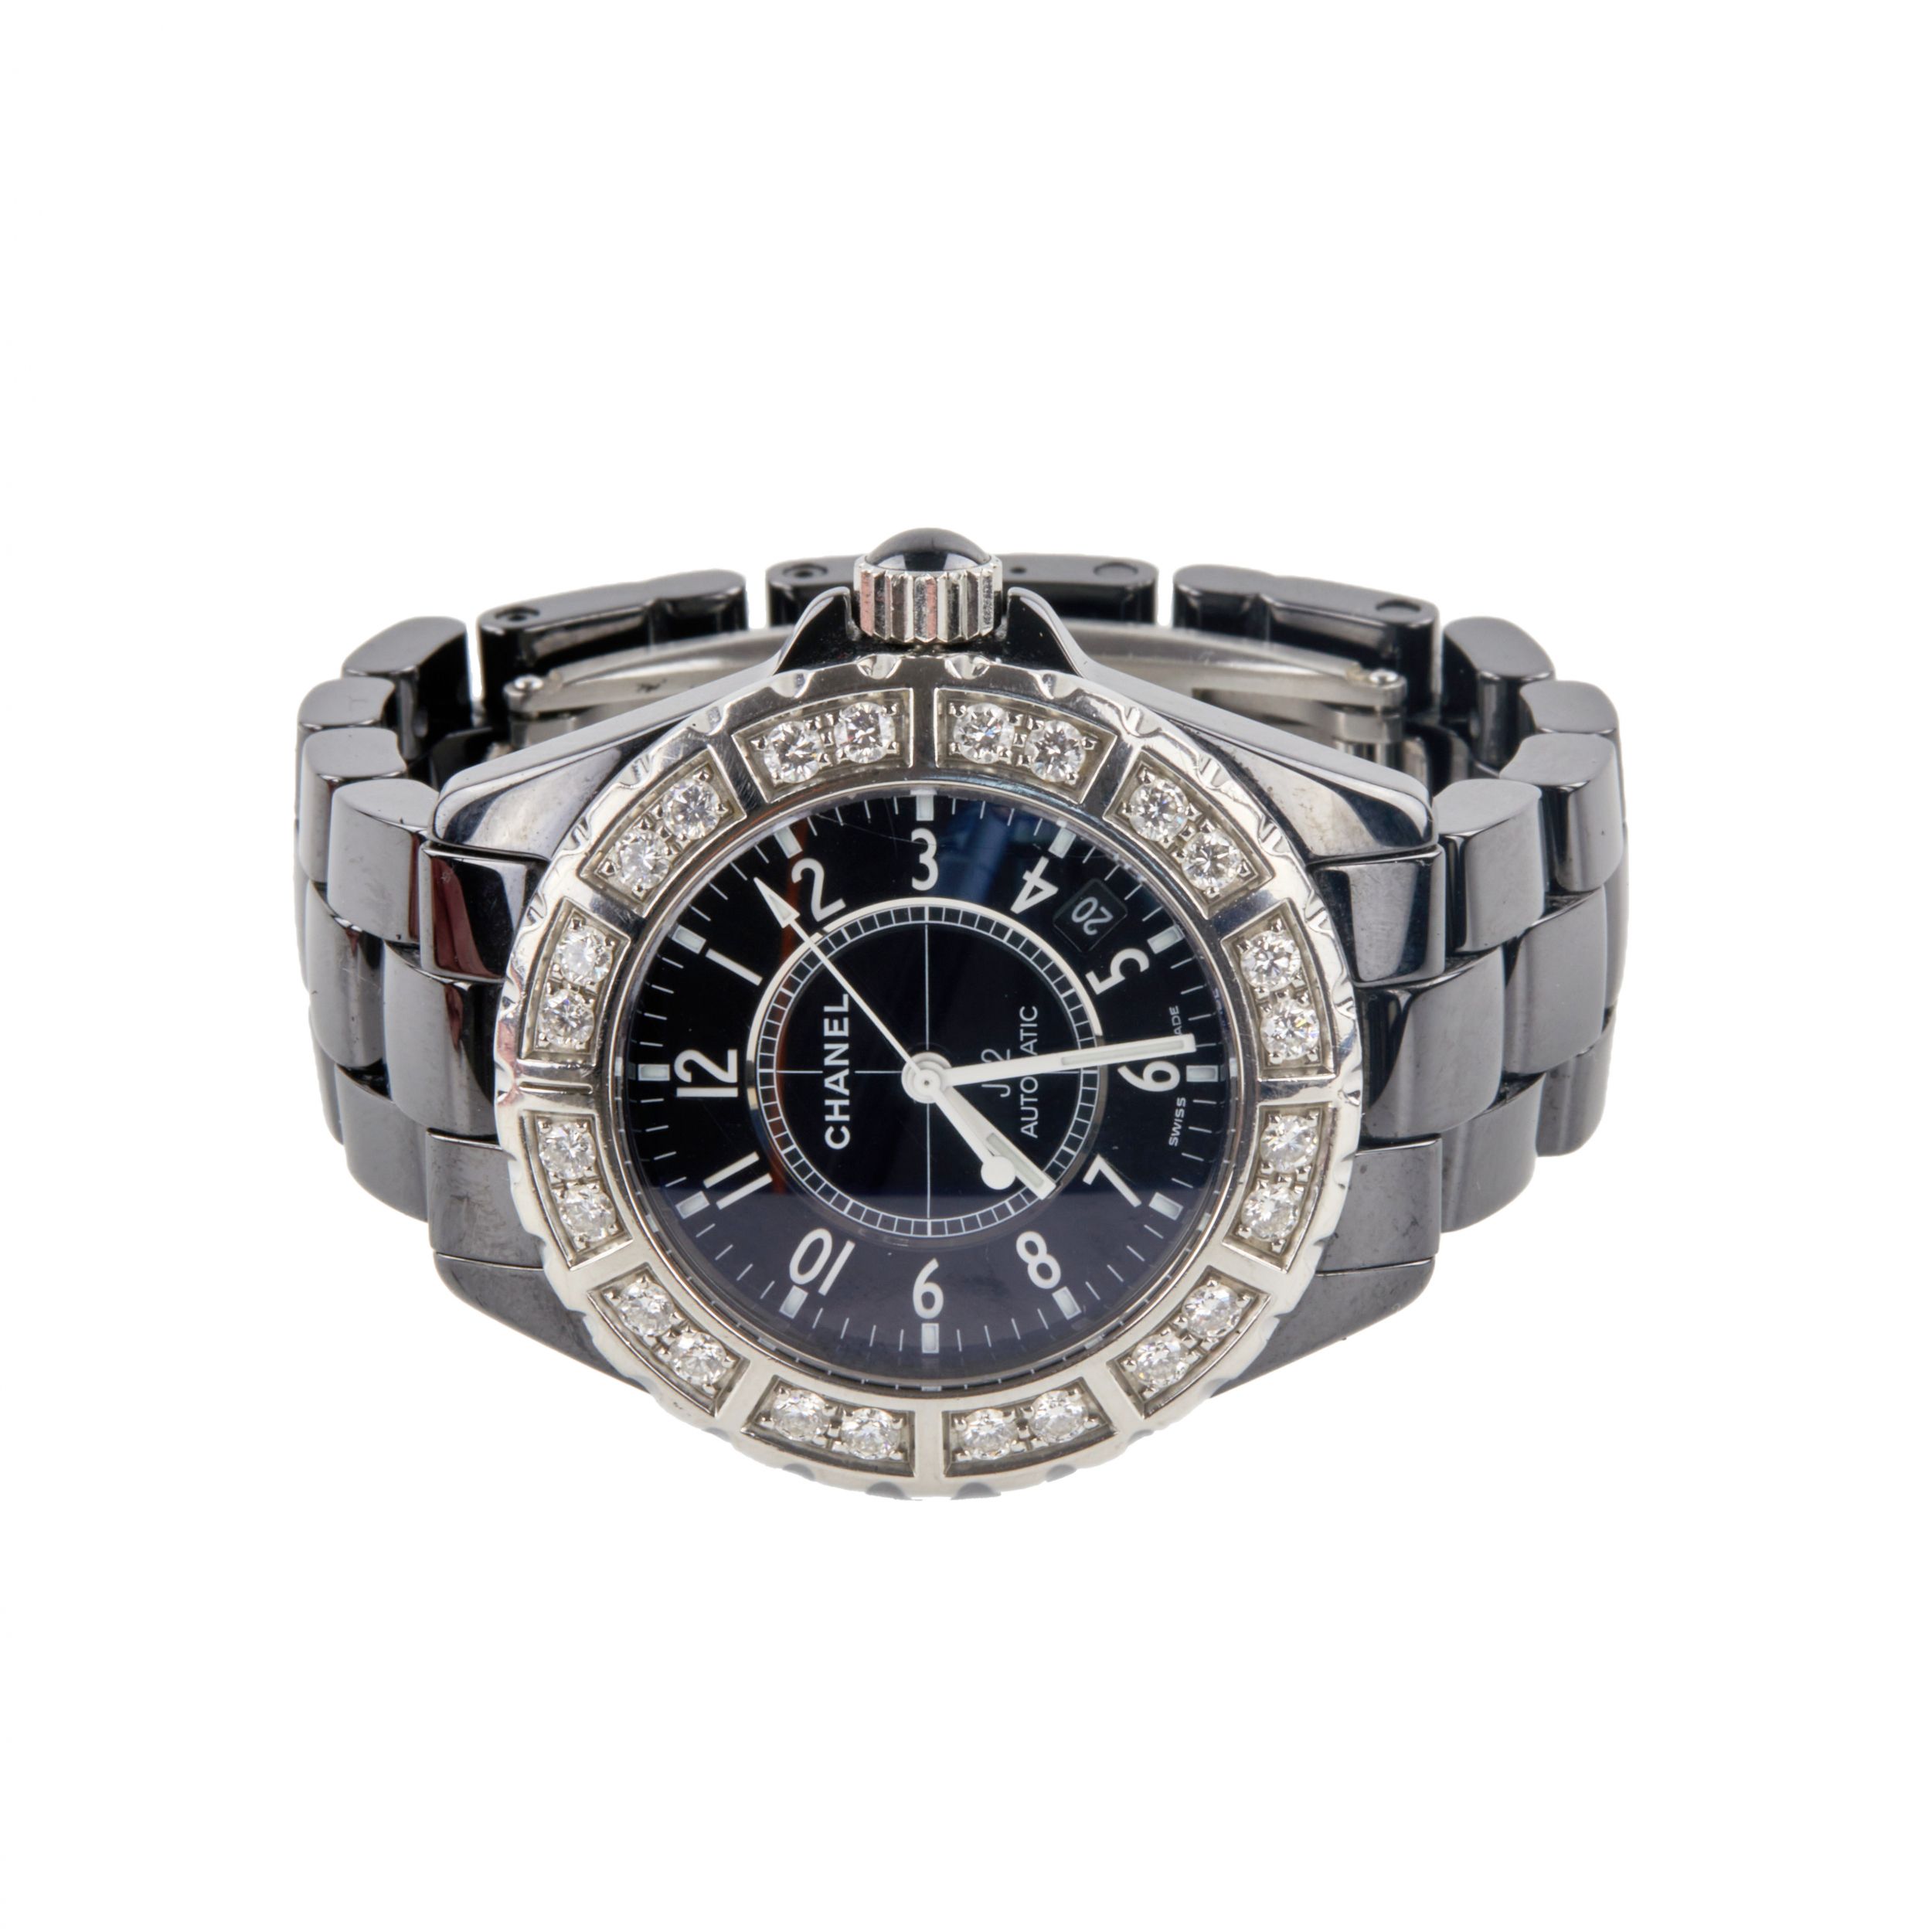 CHANEL J12 Classic Unisex Watch H1174. - Image 3 of 6